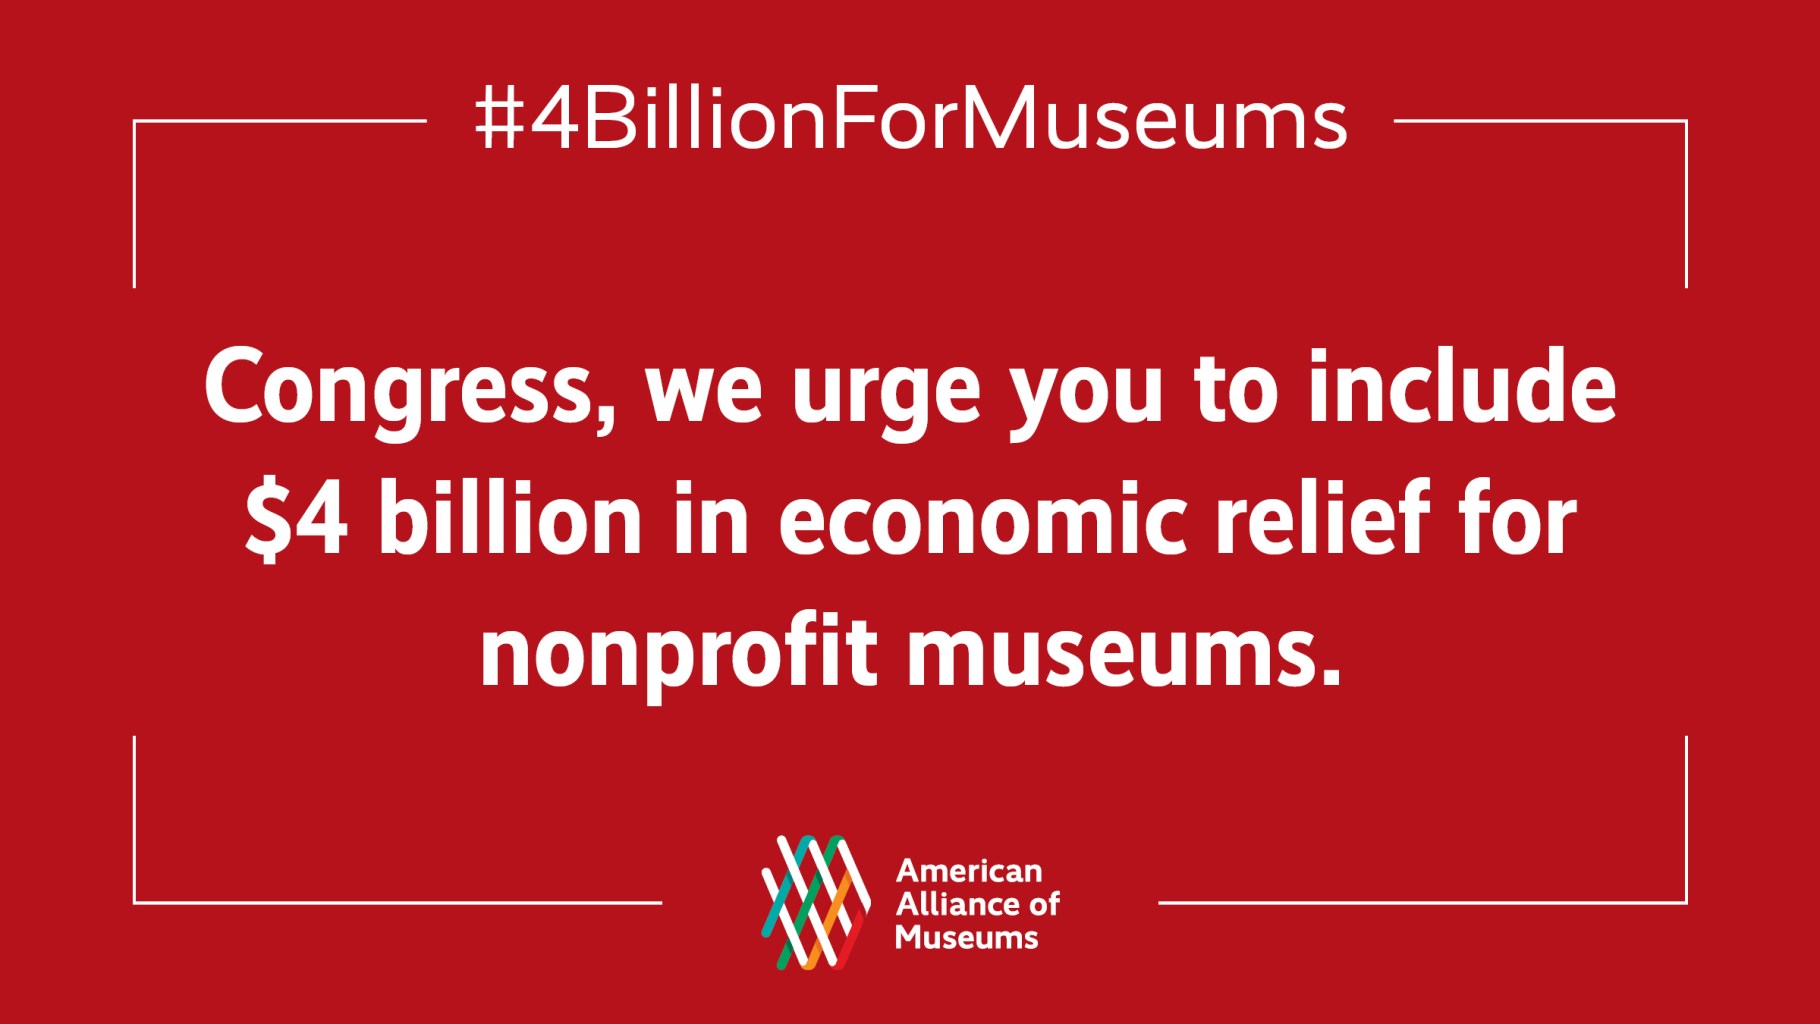 A graphic reading "#4BillionForMuseums. Congress, we urge you to include $4 billion in economic relief for nonprofits museums." with the AAM logo underneath.